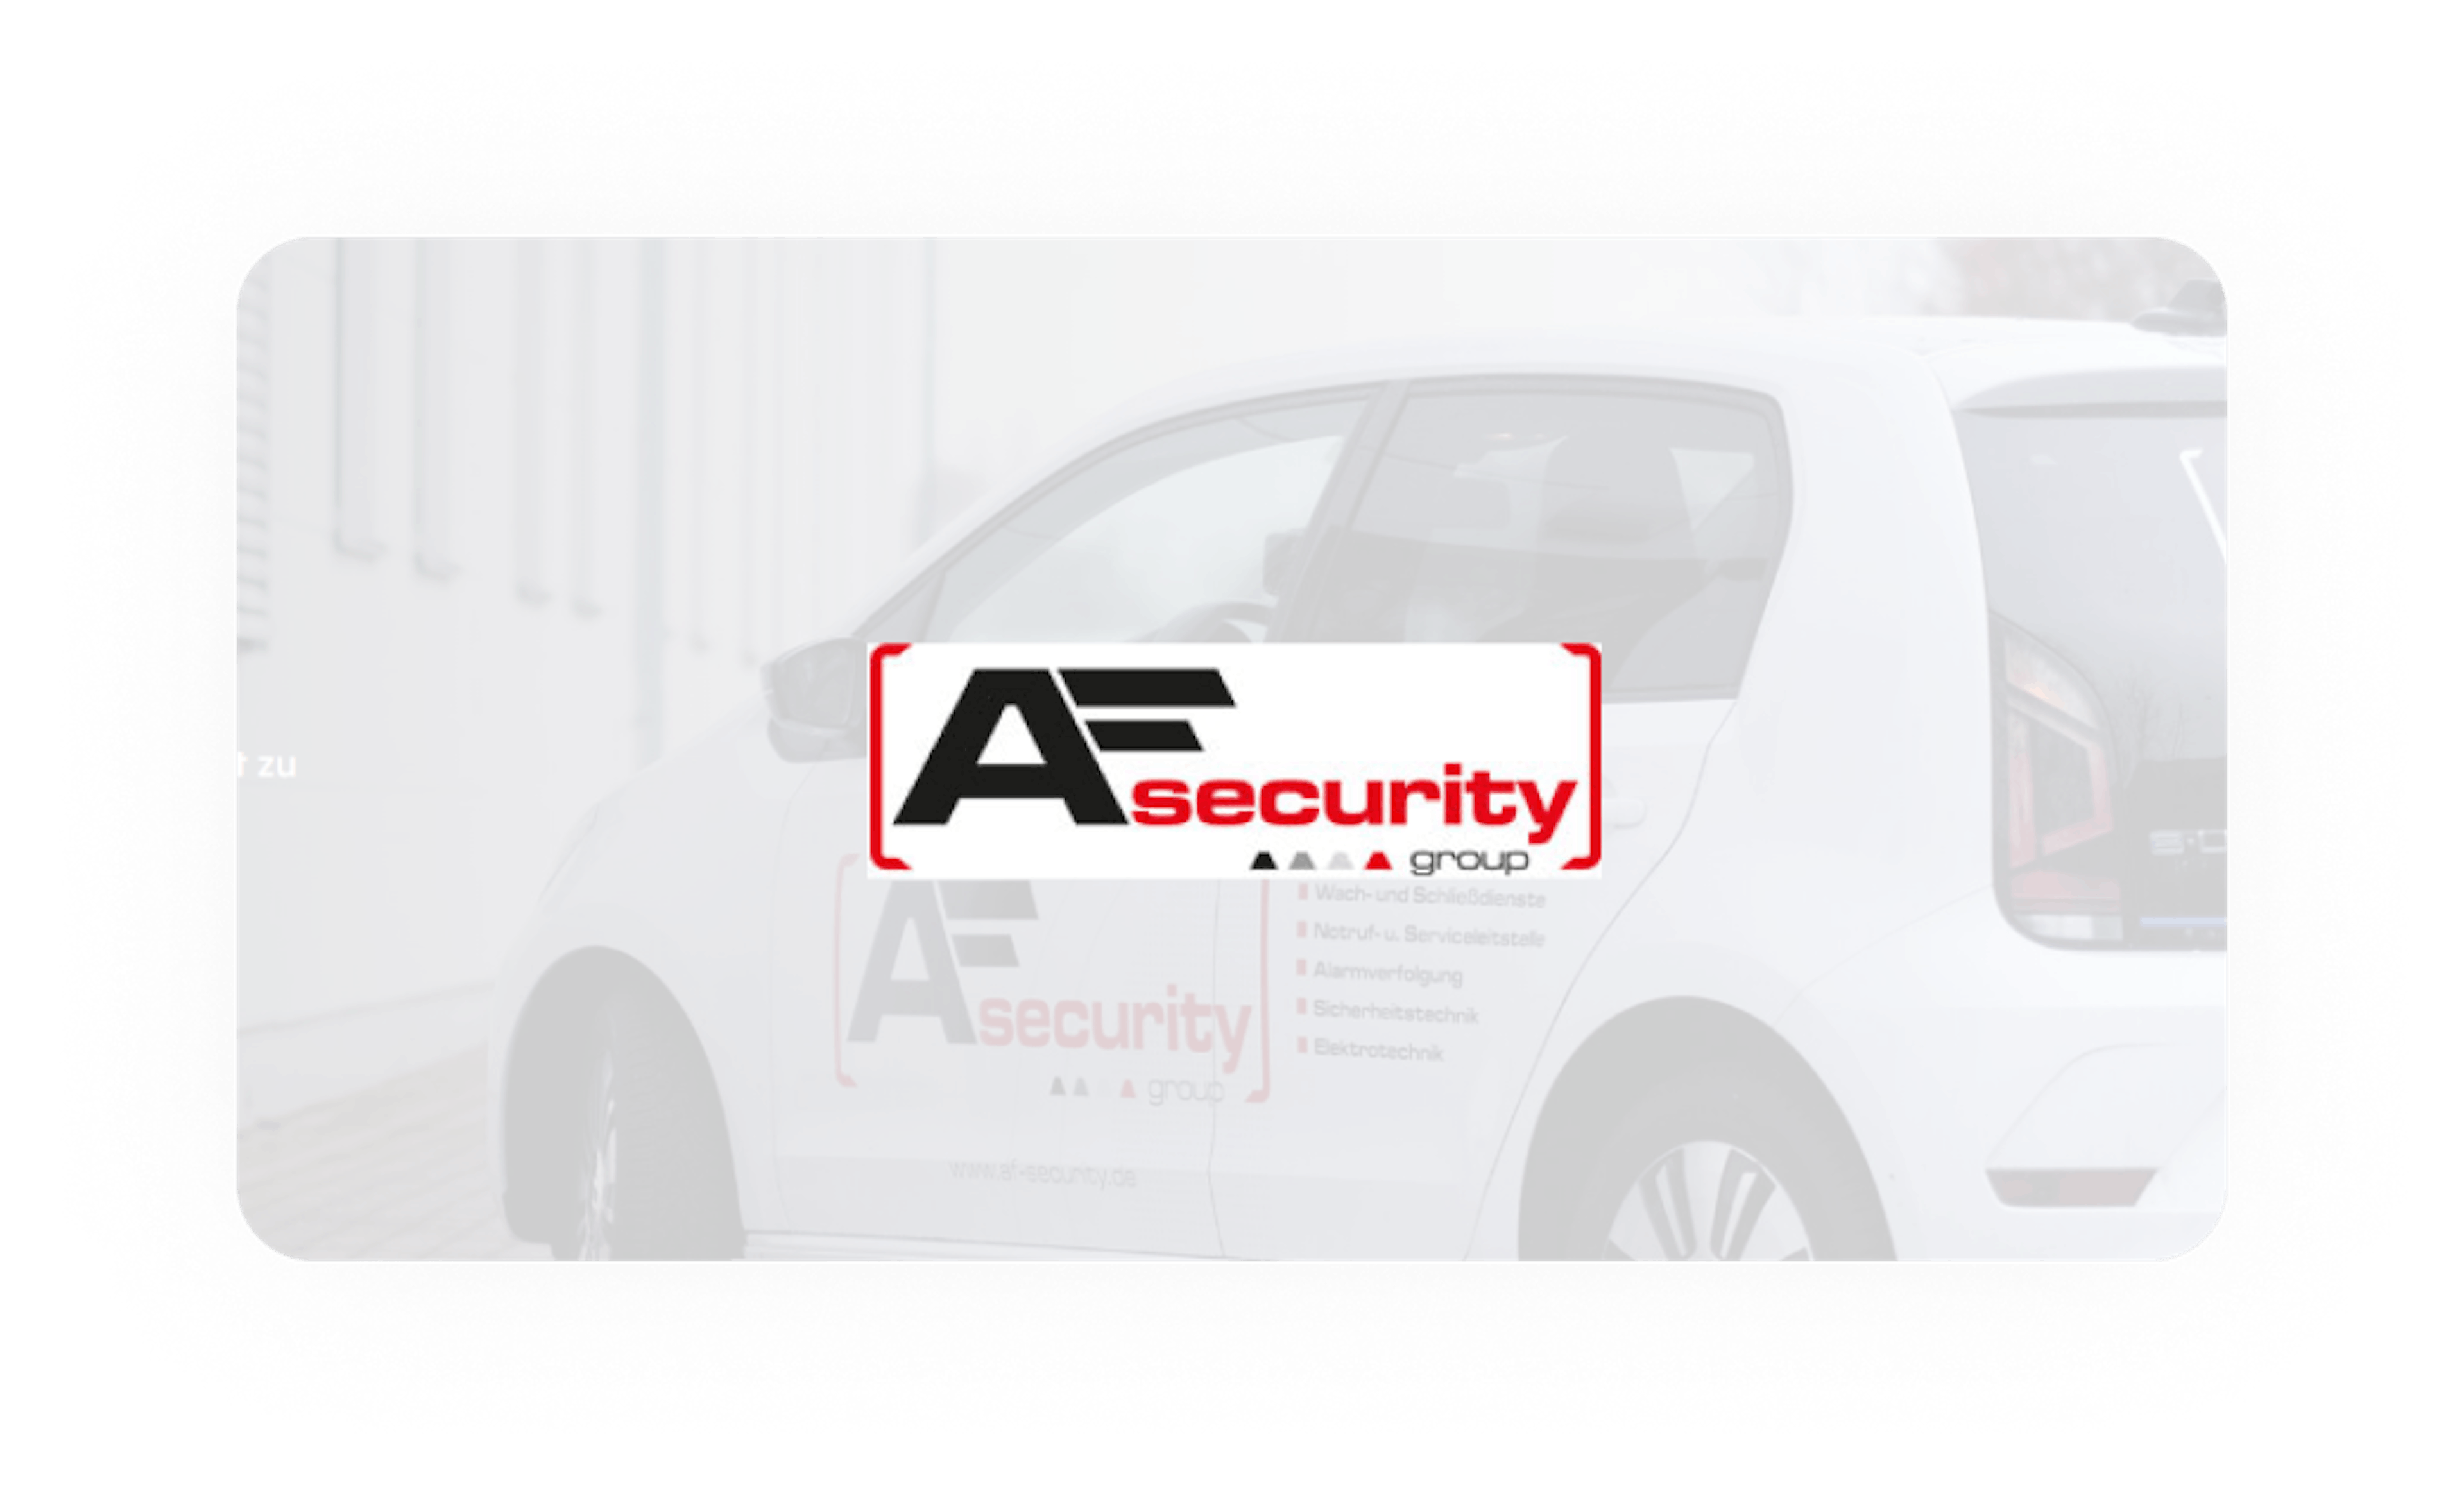 AF Security logo on a background with a car